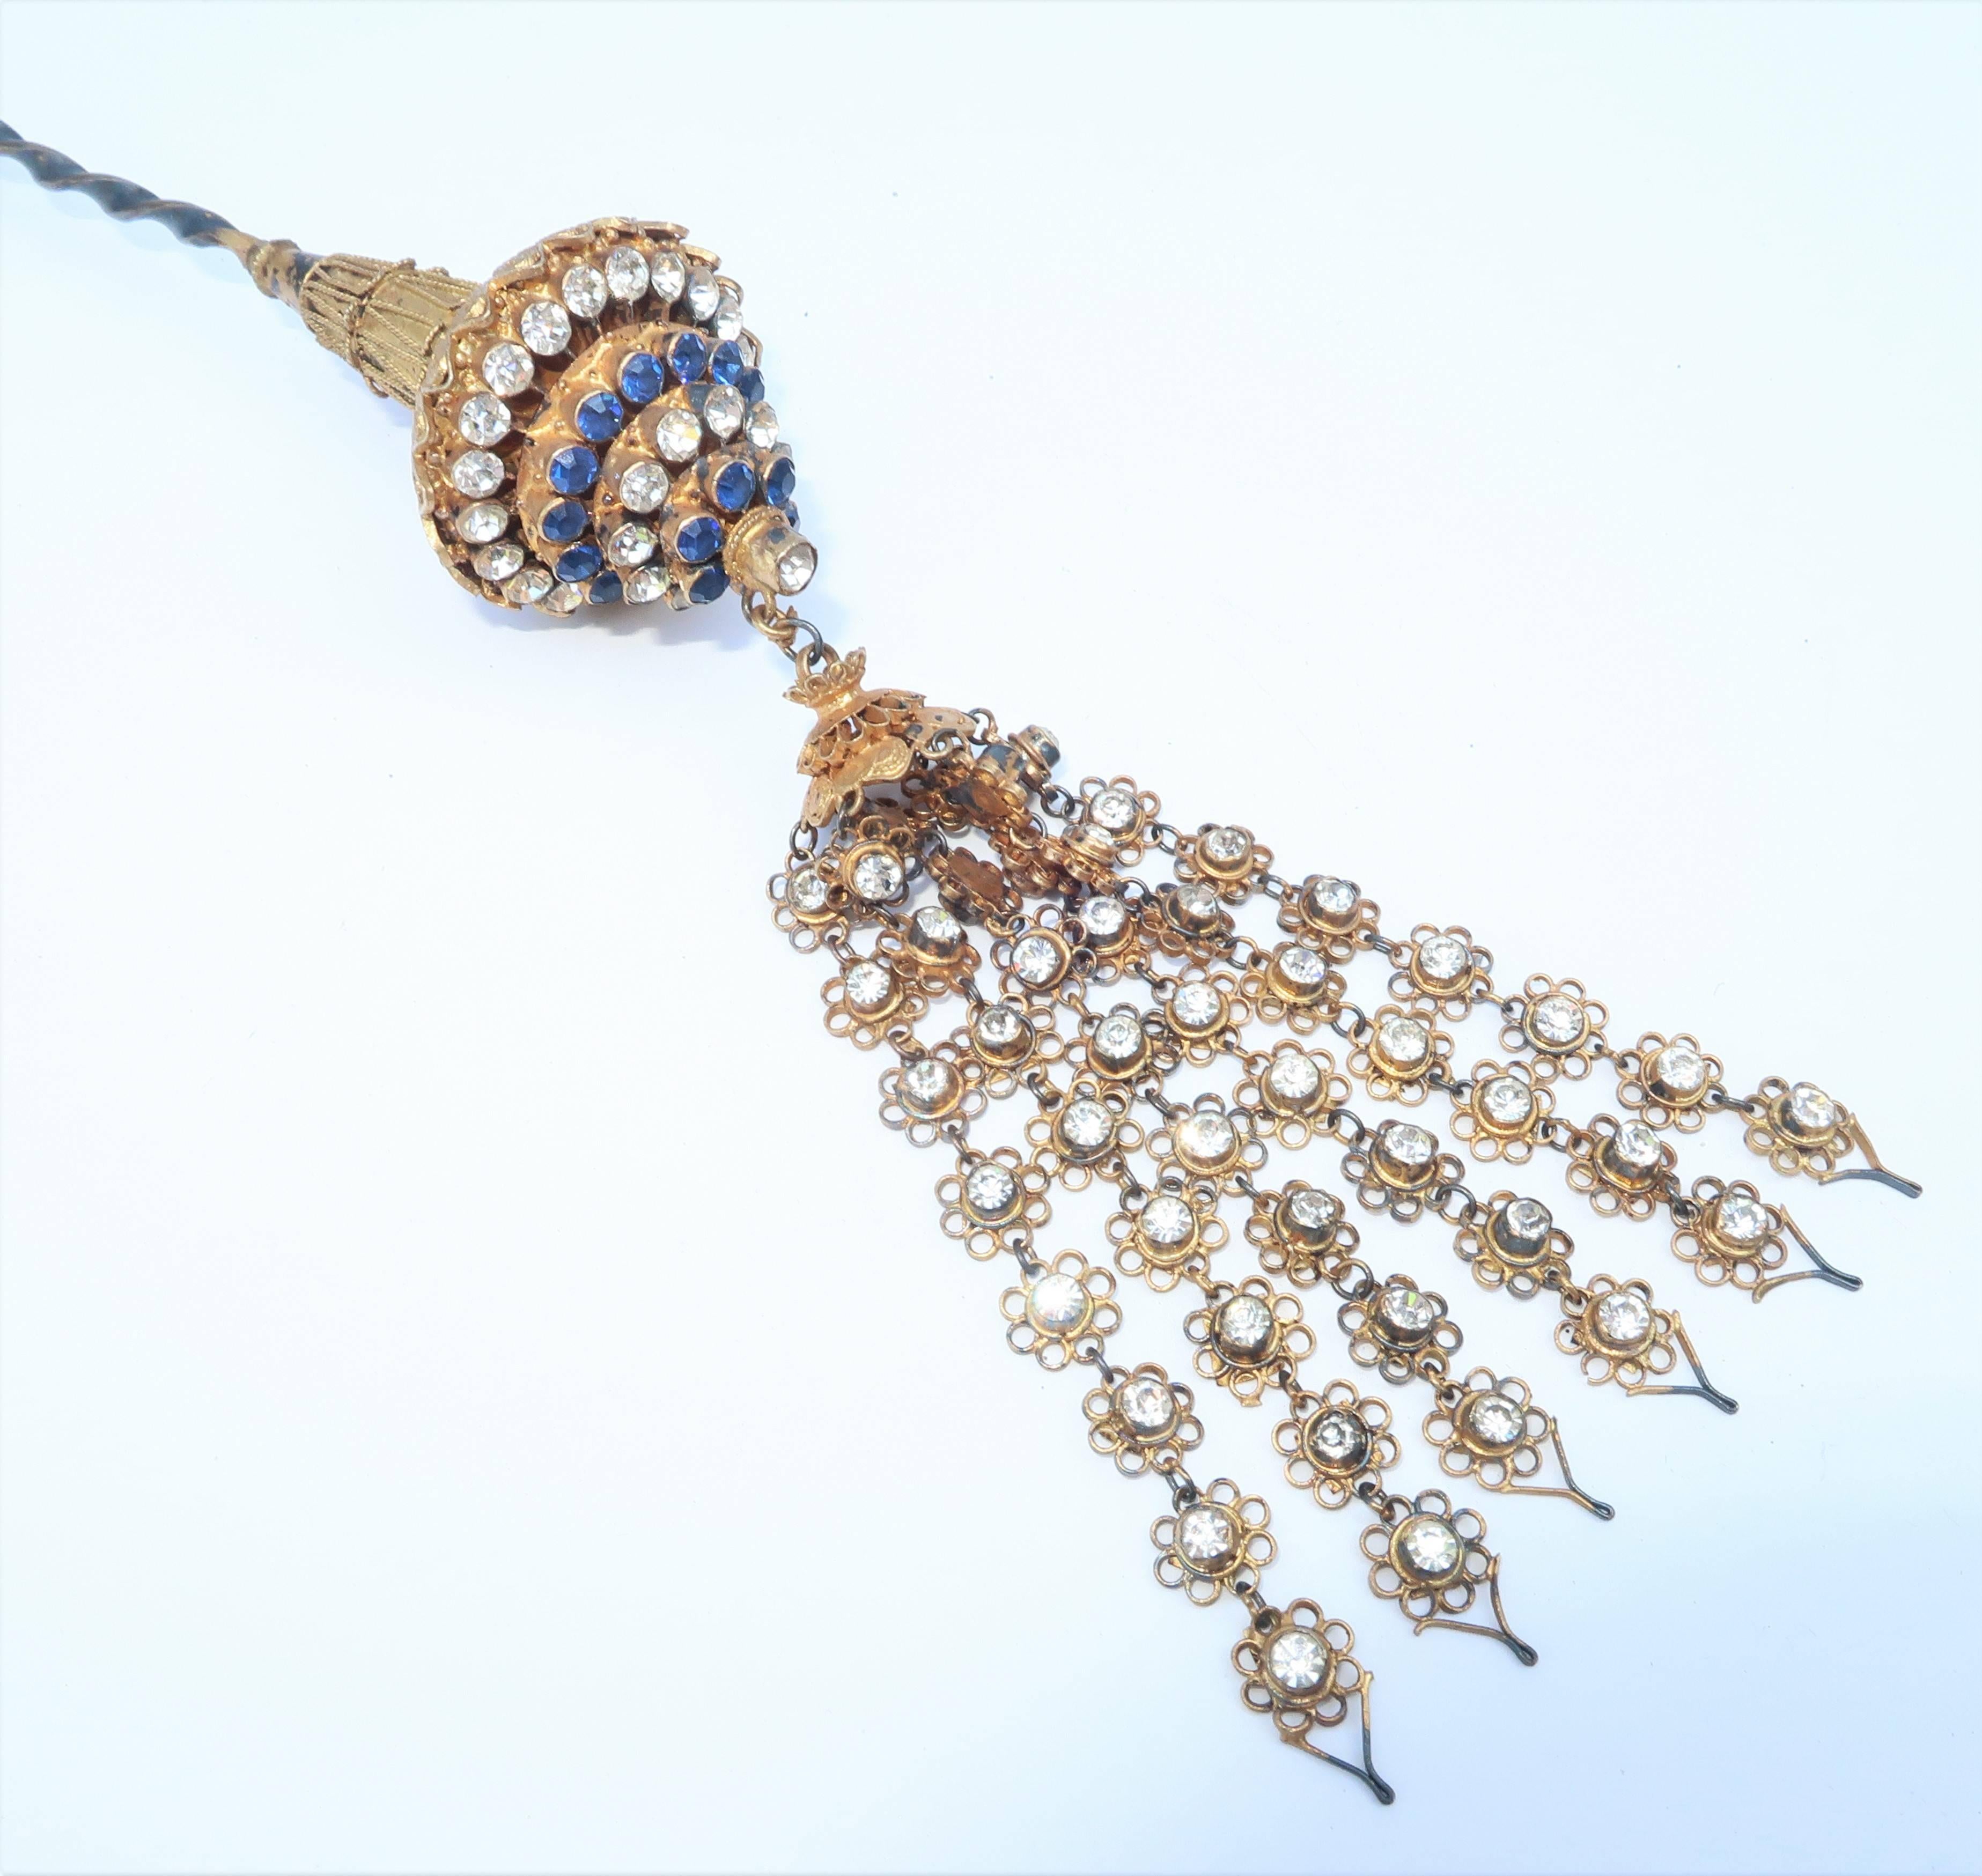 'Hair ornament' aptly describes this beautifully detailed accessory that serves to enhance an updo with an exotic vintage quality.  The twisted stick pin operates well to anchor the sapphire blue and crystal rhinestone embellished filigree finial